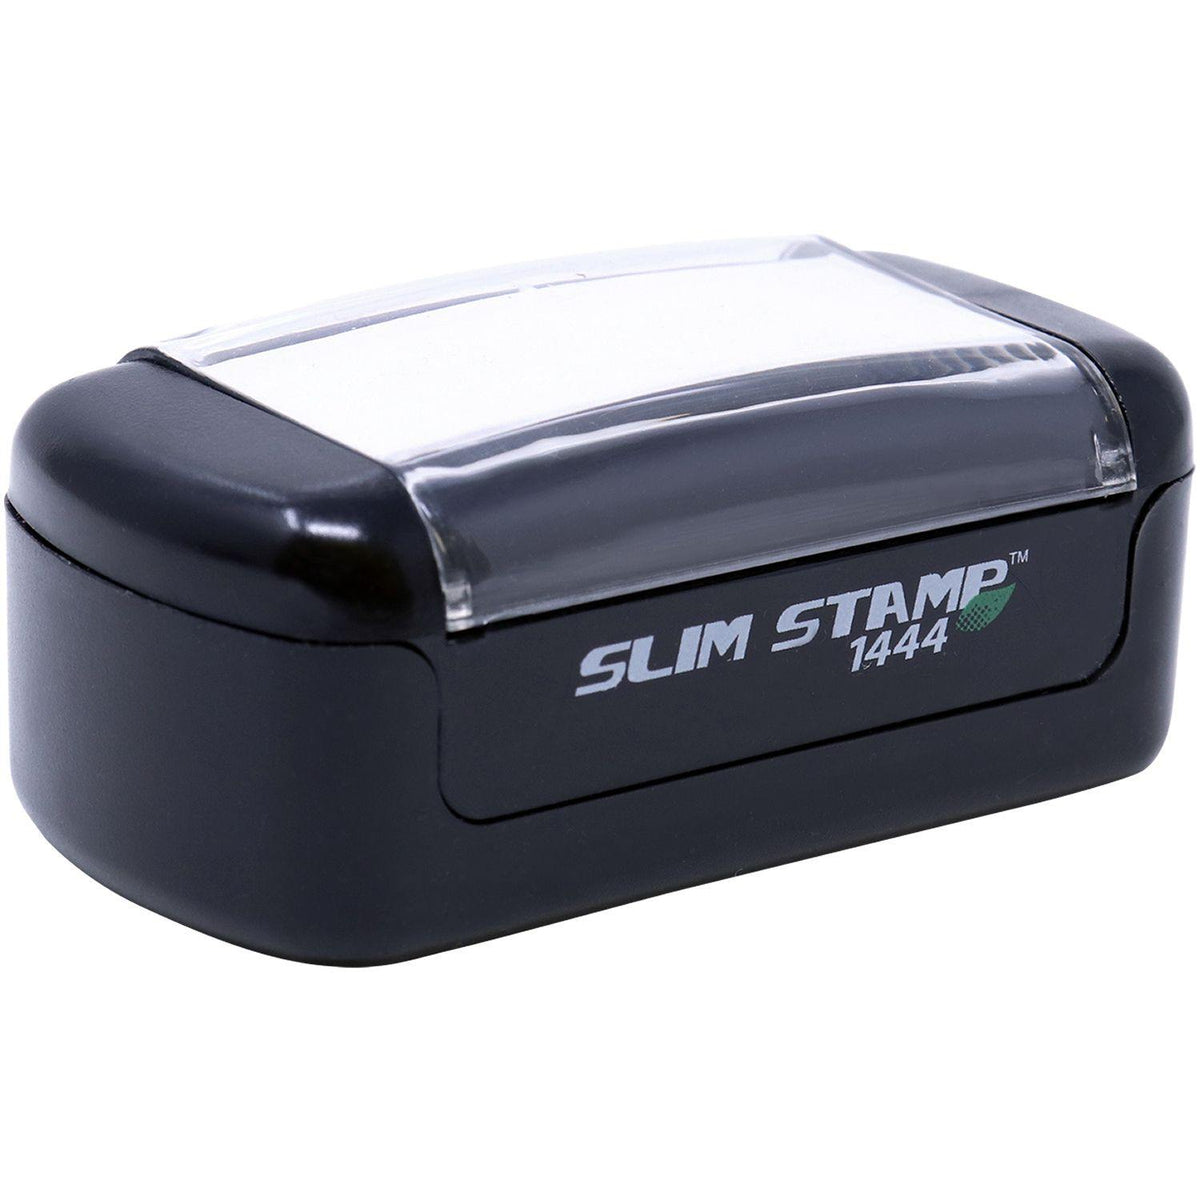 Alt View of Slim Pre-Inked Courtesy Copy Original Filed Electronically Stamp Mount Angle